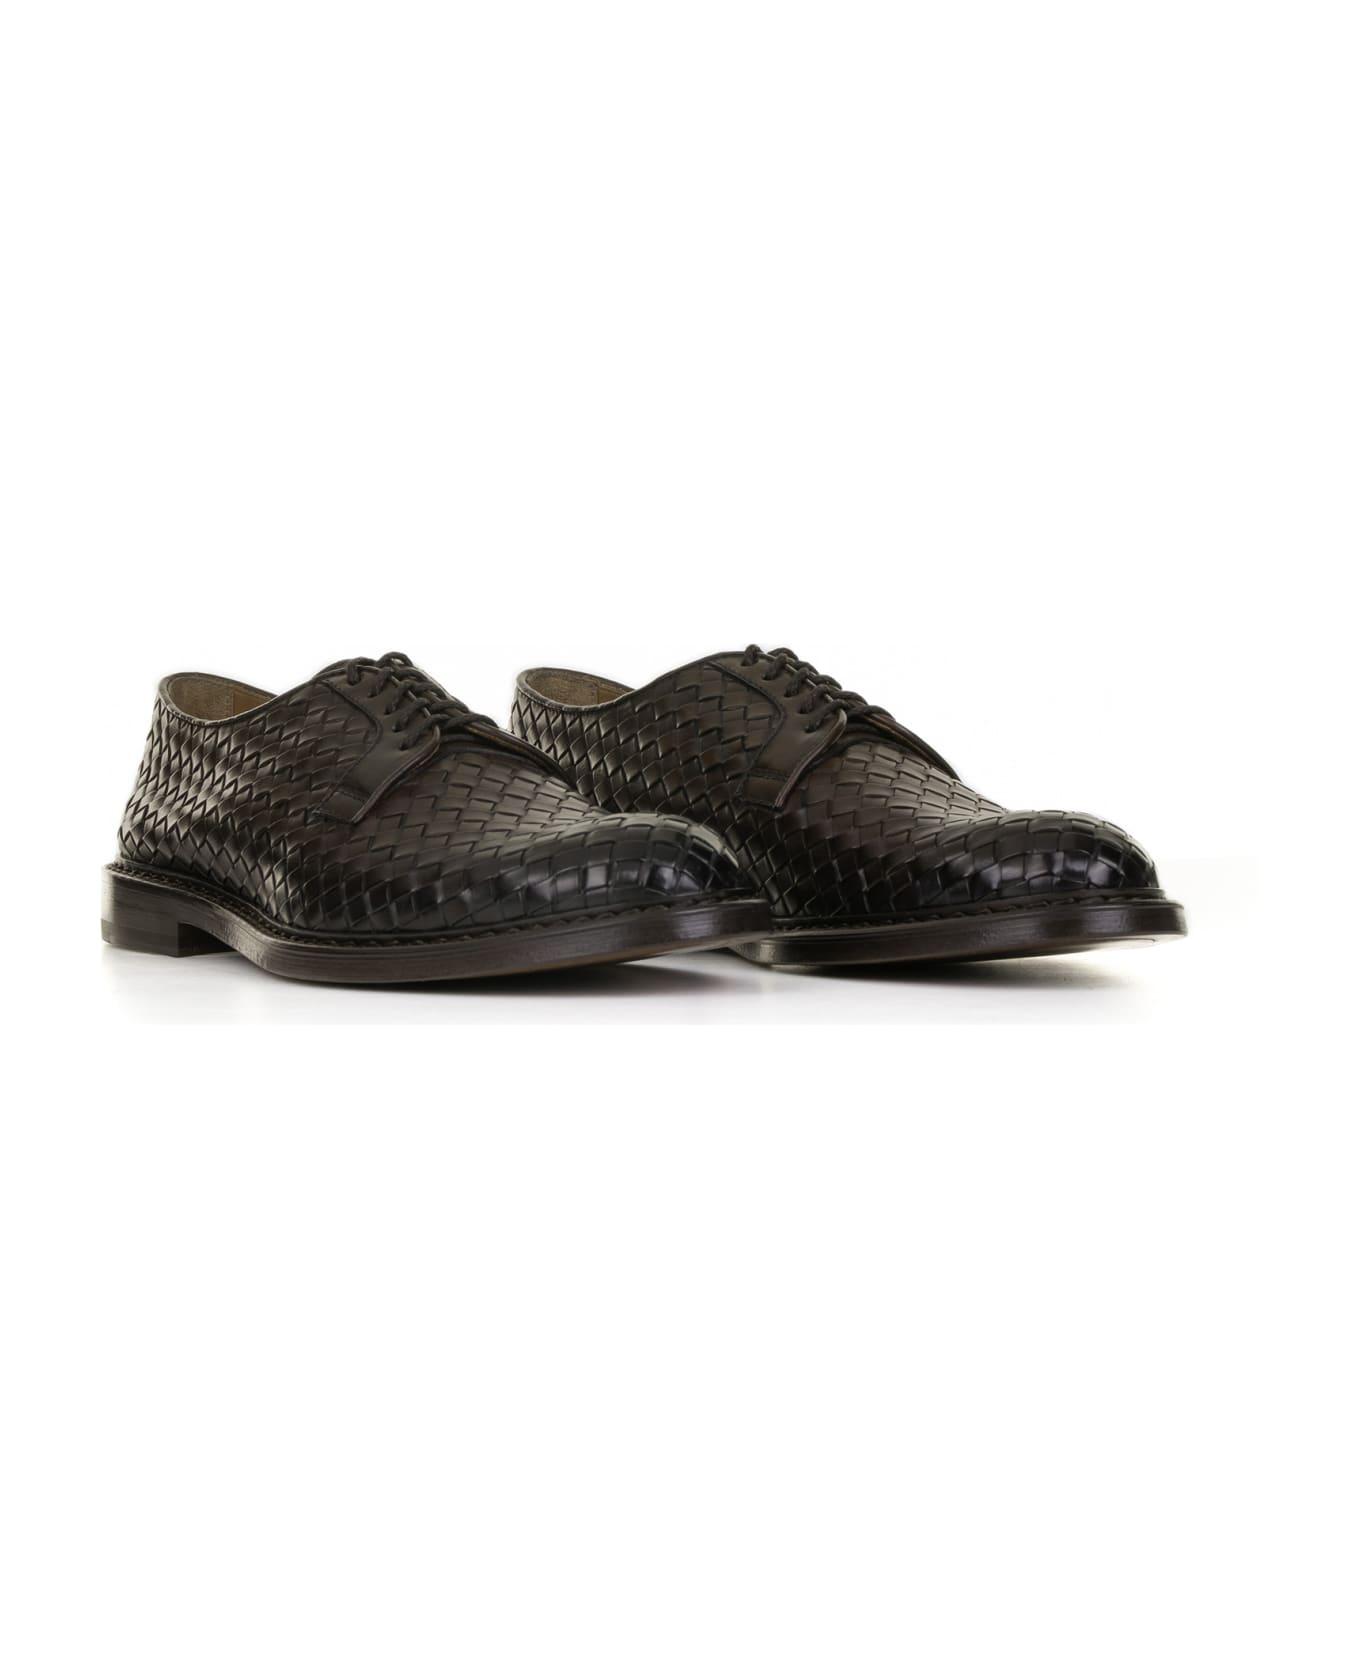 Doucal's Brown Derby In Woven Leather - MARRONE